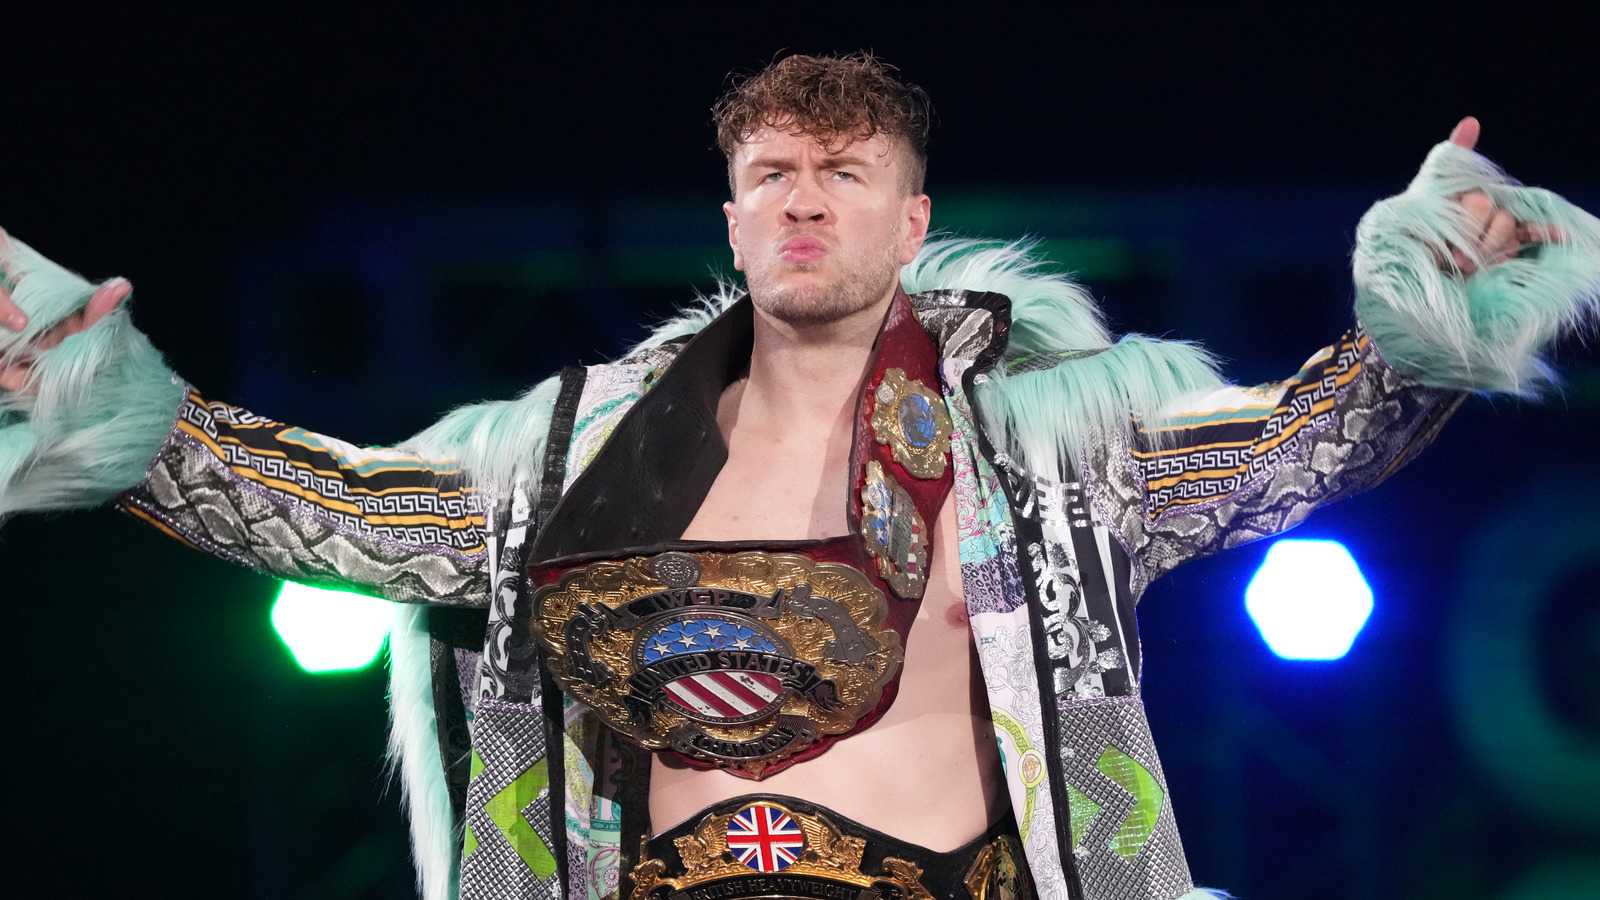 Will Ospreay – ‘I’m Ready To Be The Number One Guy In AEW’ [Video]